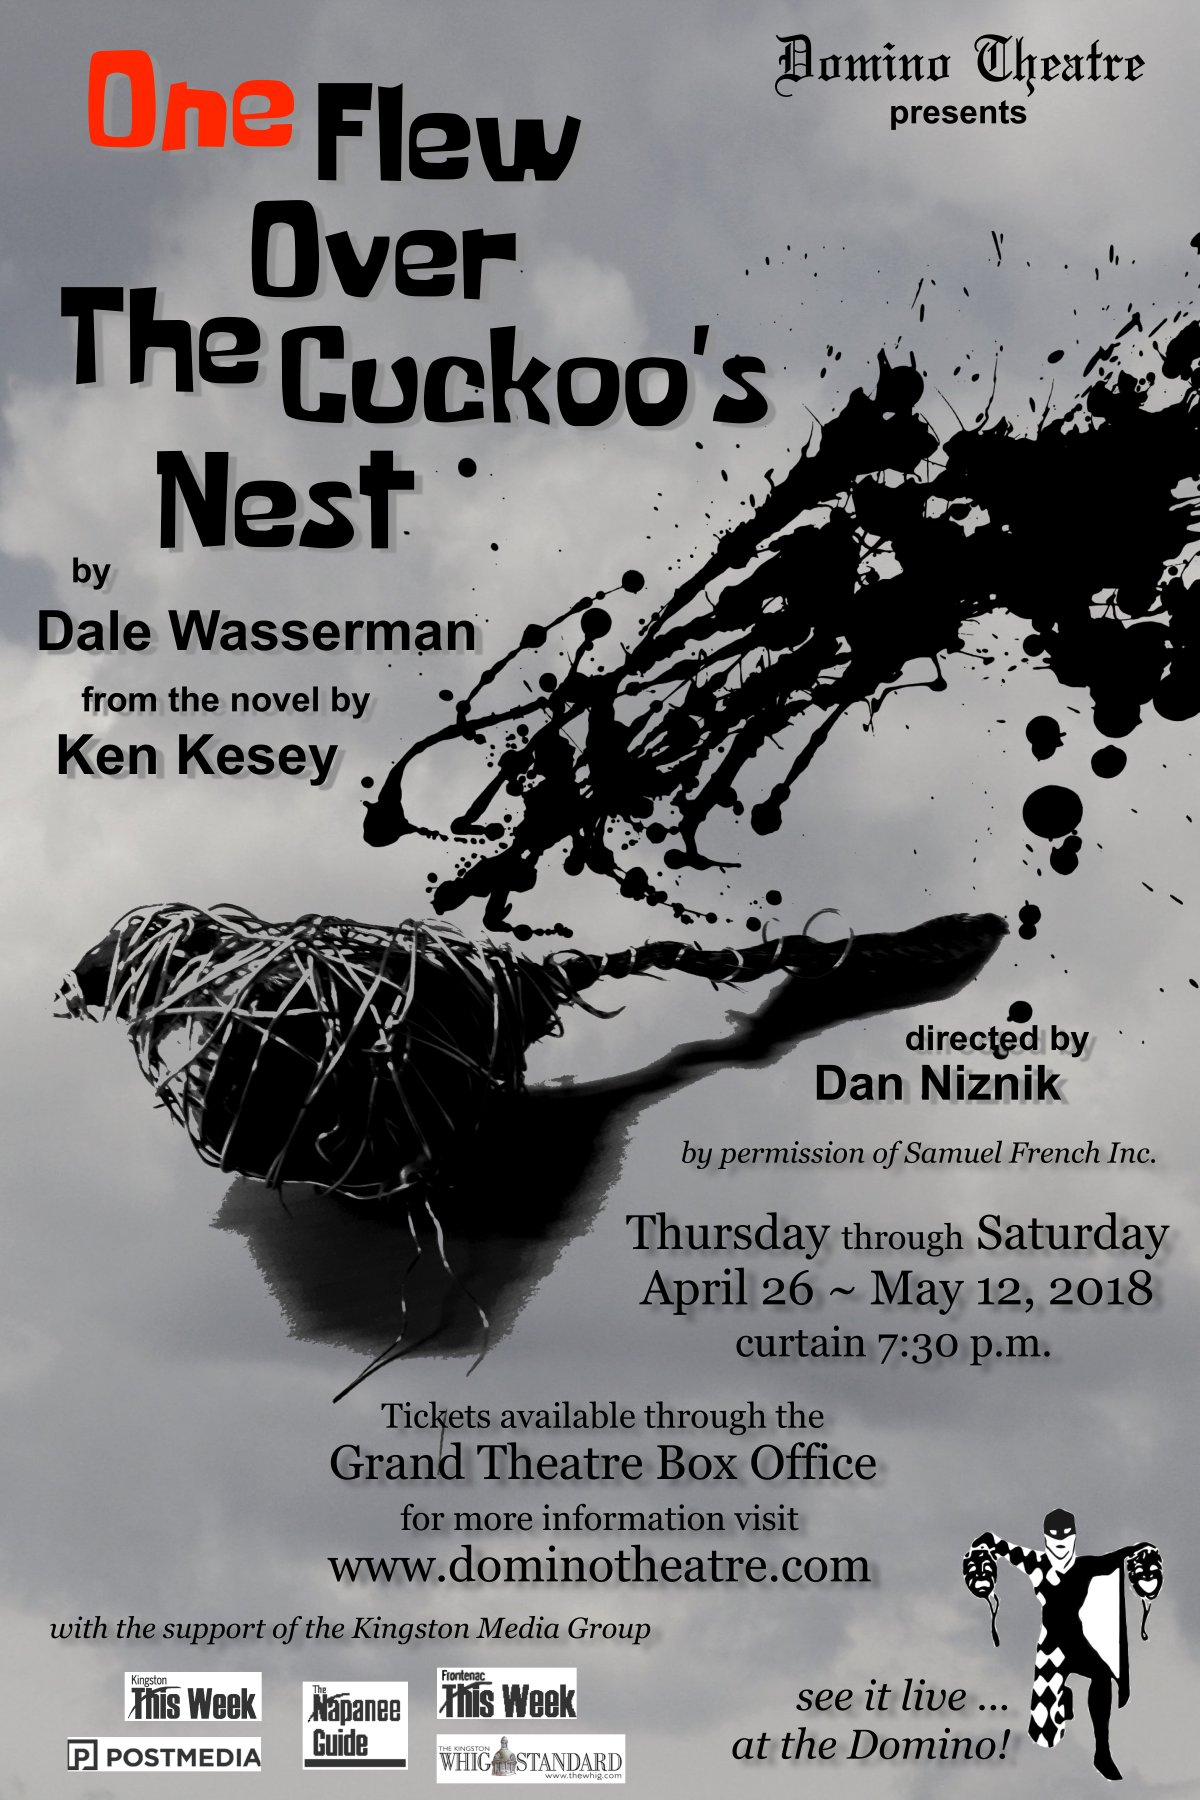 Domino Theatre presents: One Flew Over The Cuckoo’s Nest by Dale Wasserman - image